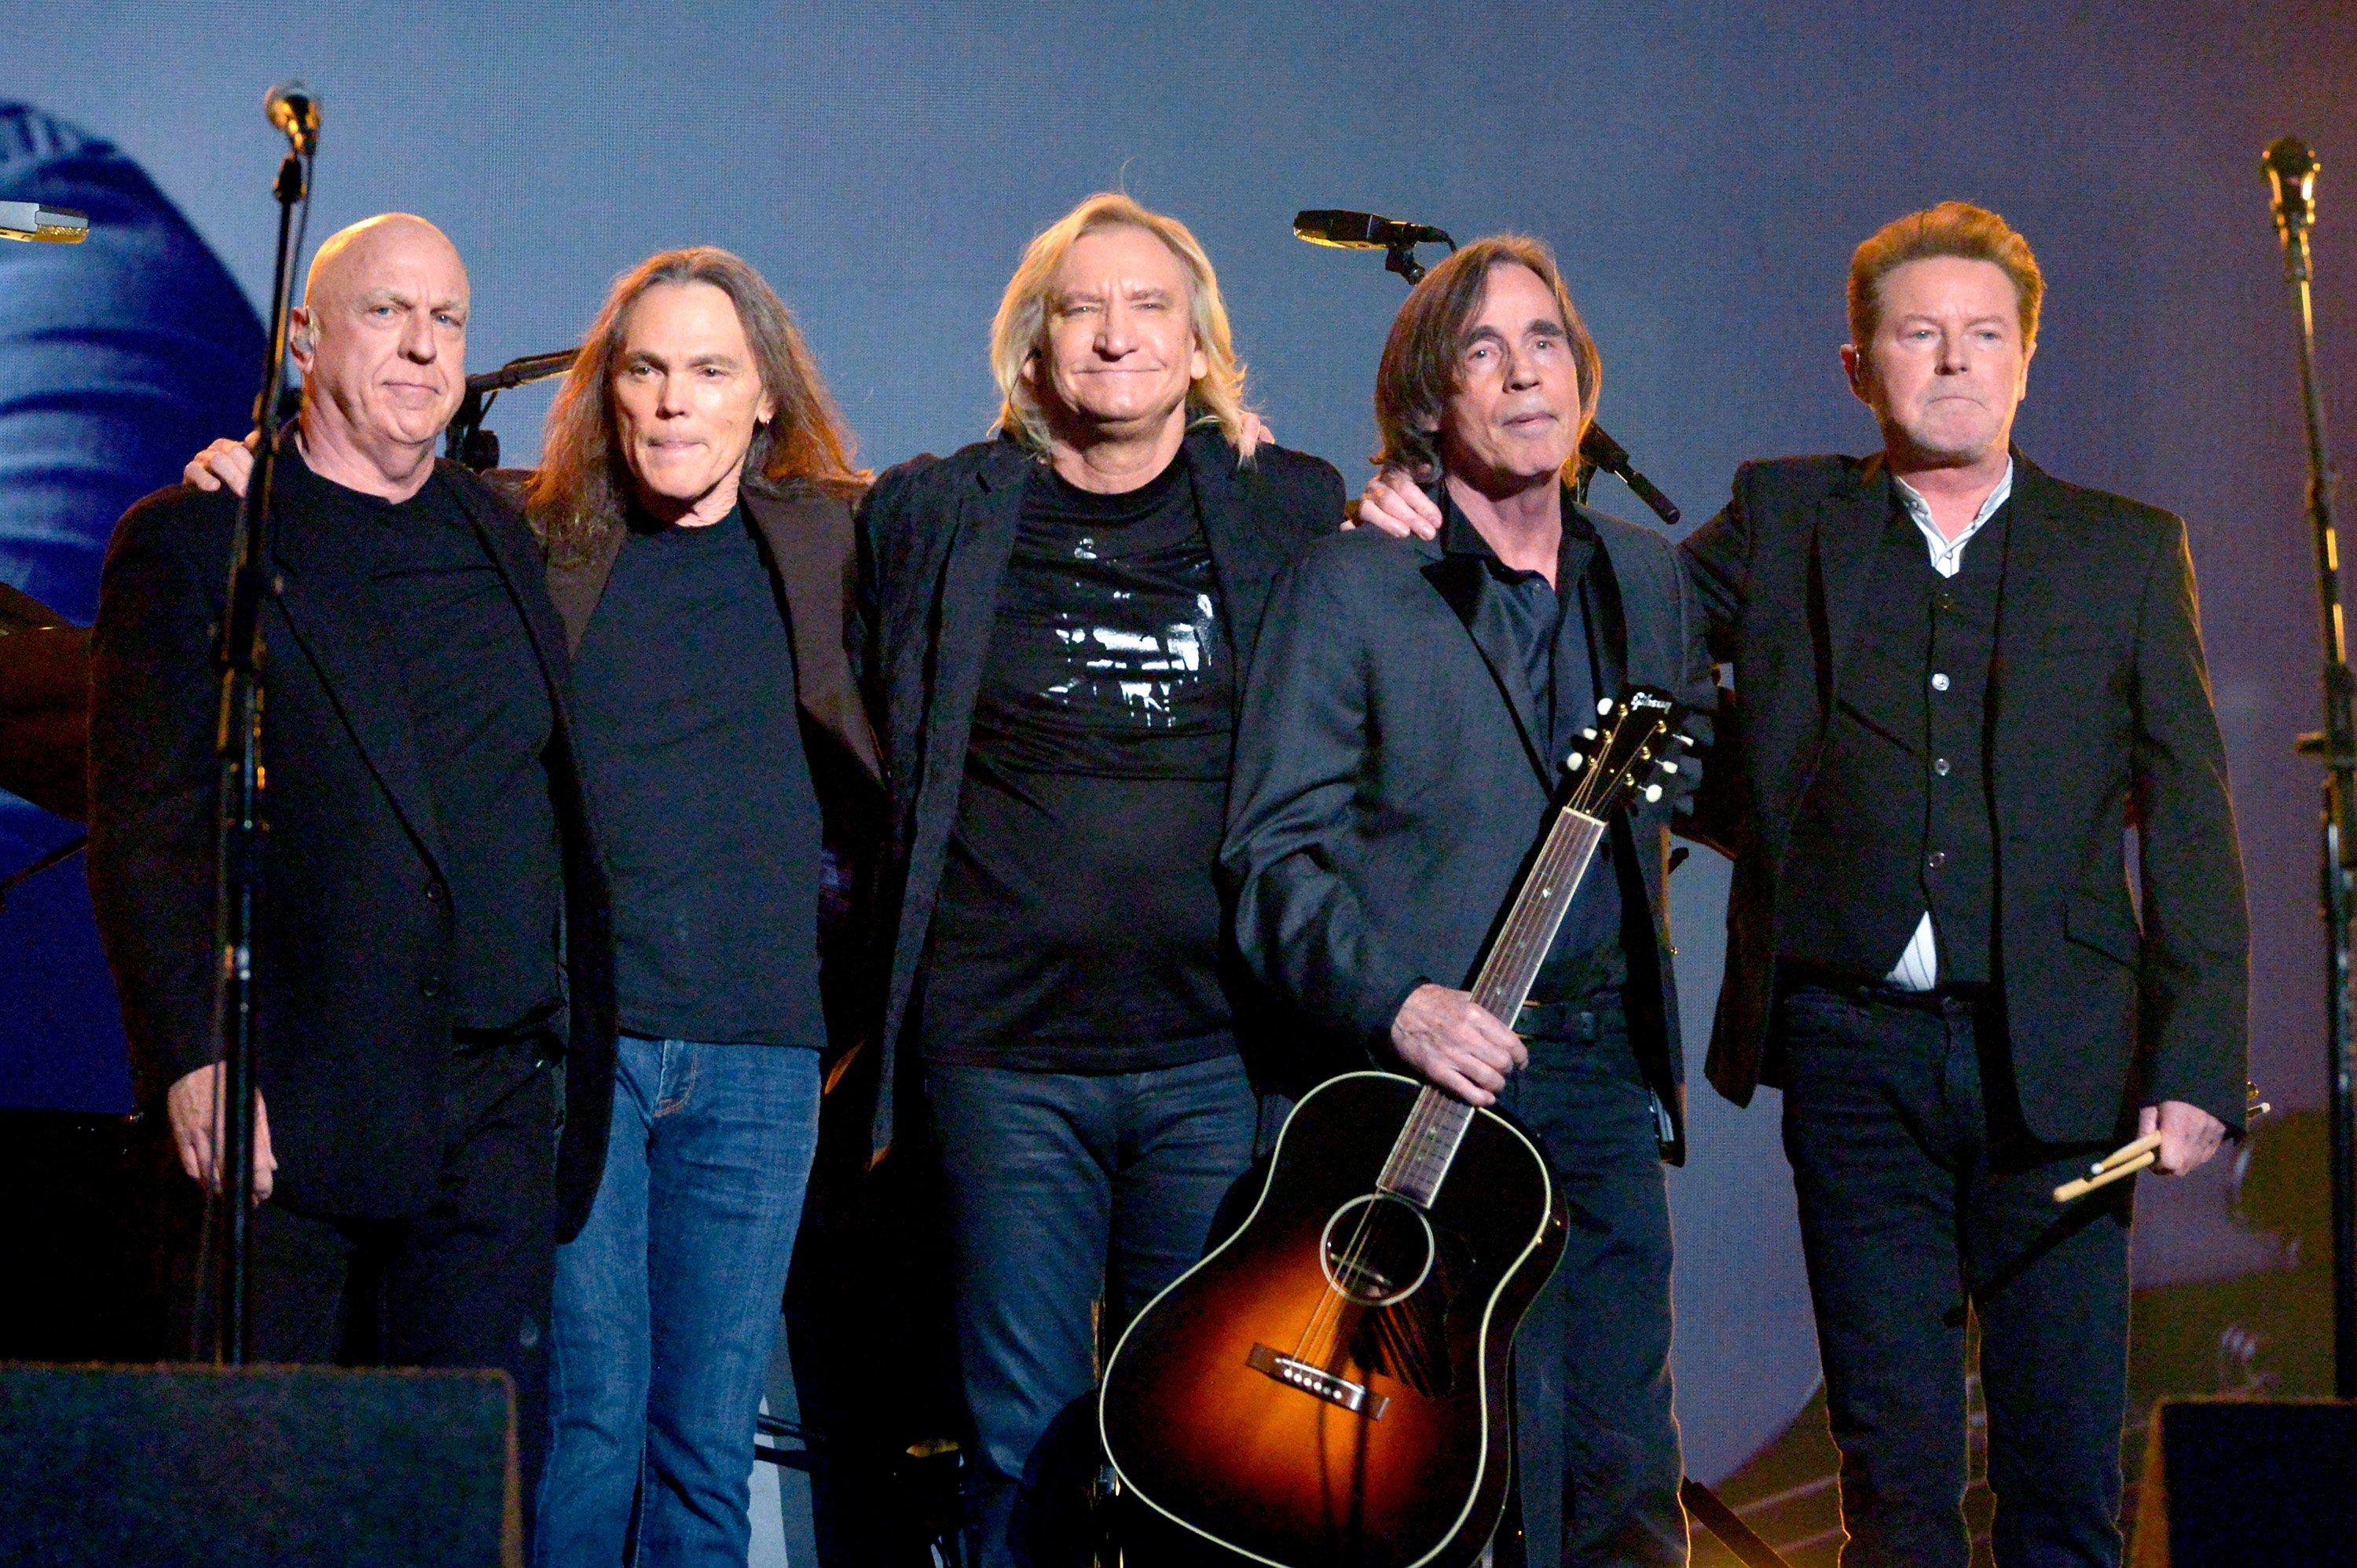 Eagles perform at the 58th GRAMMYs in 2016